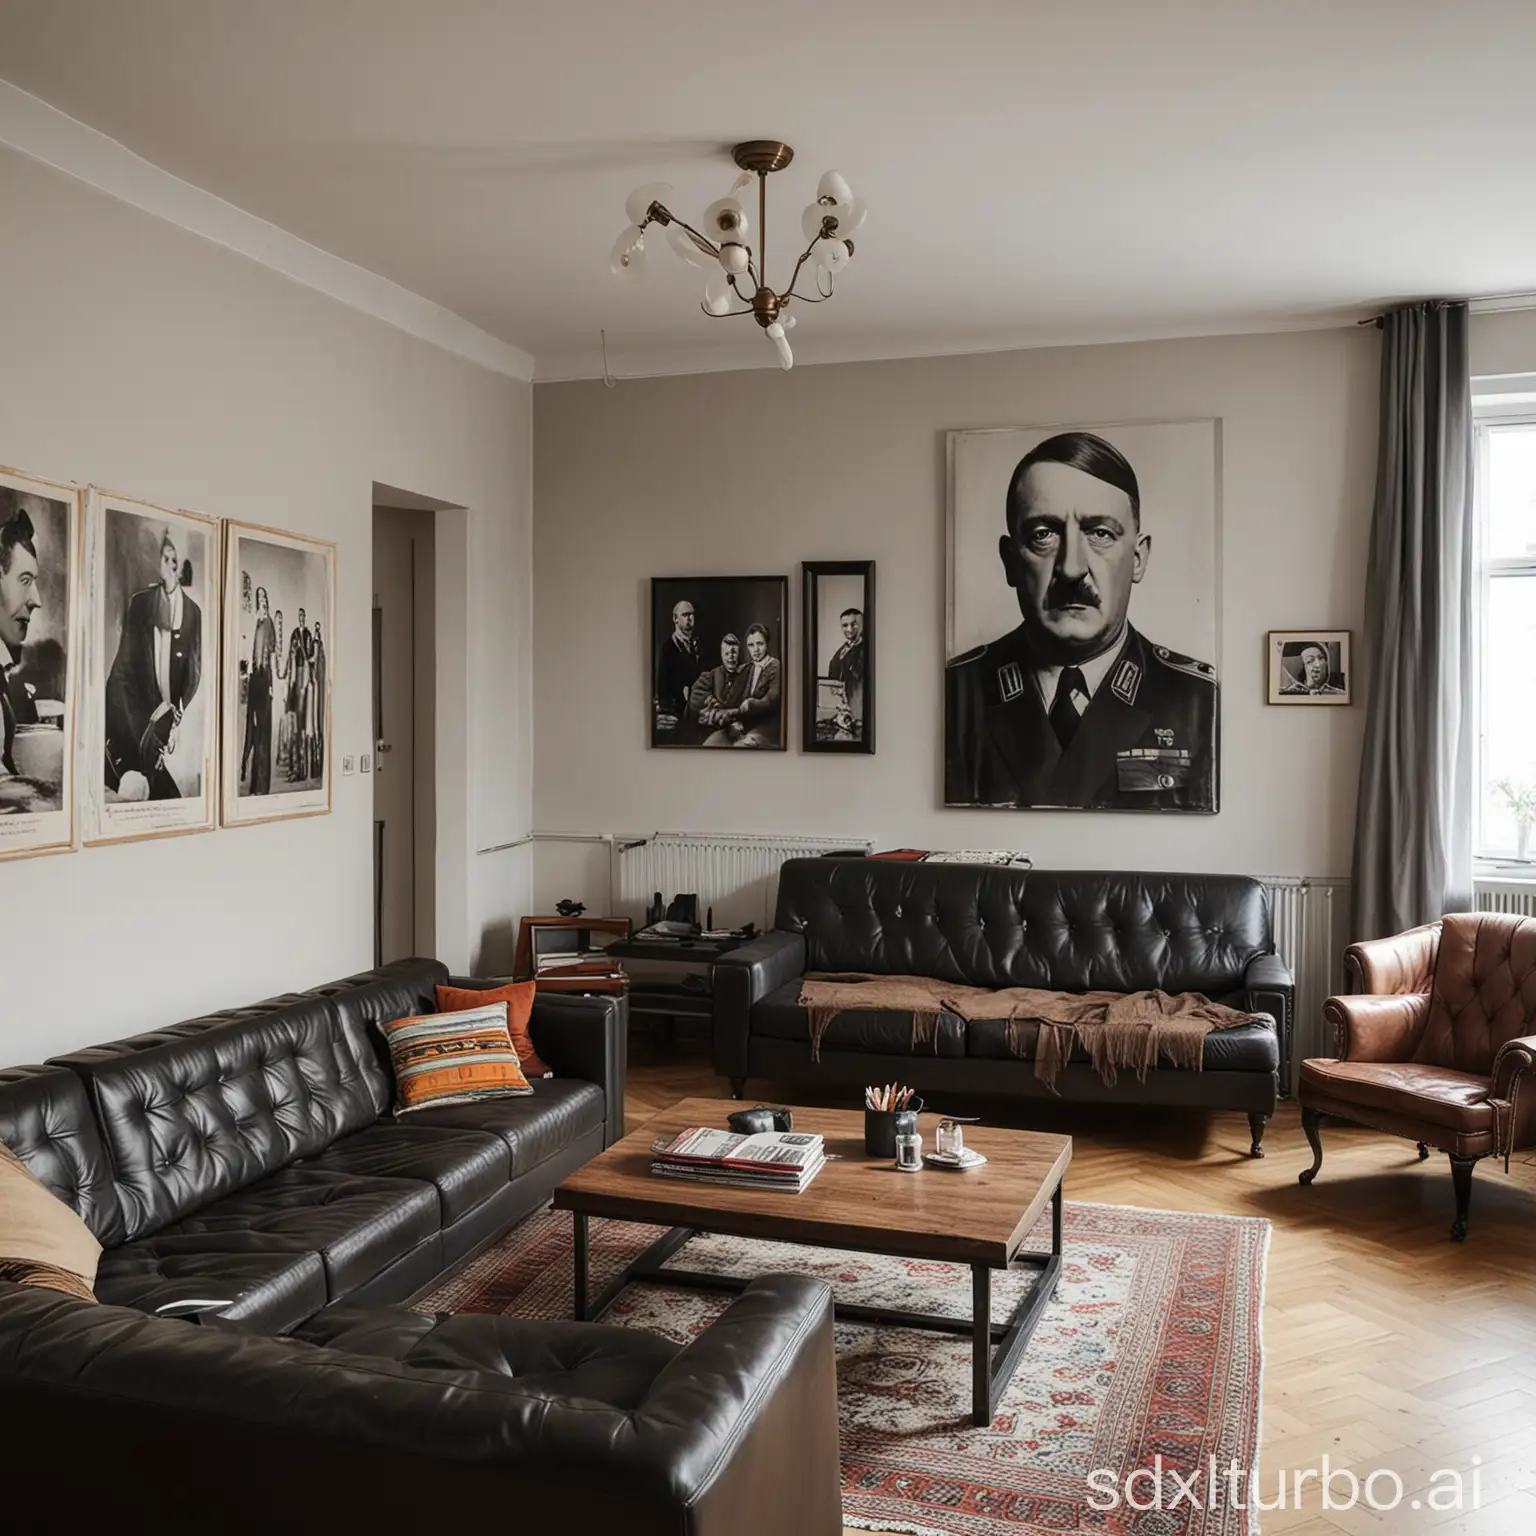 modern berlin apartment livingroom, painting of hitler on the wall, leather sofas and a black piano with family photos on top